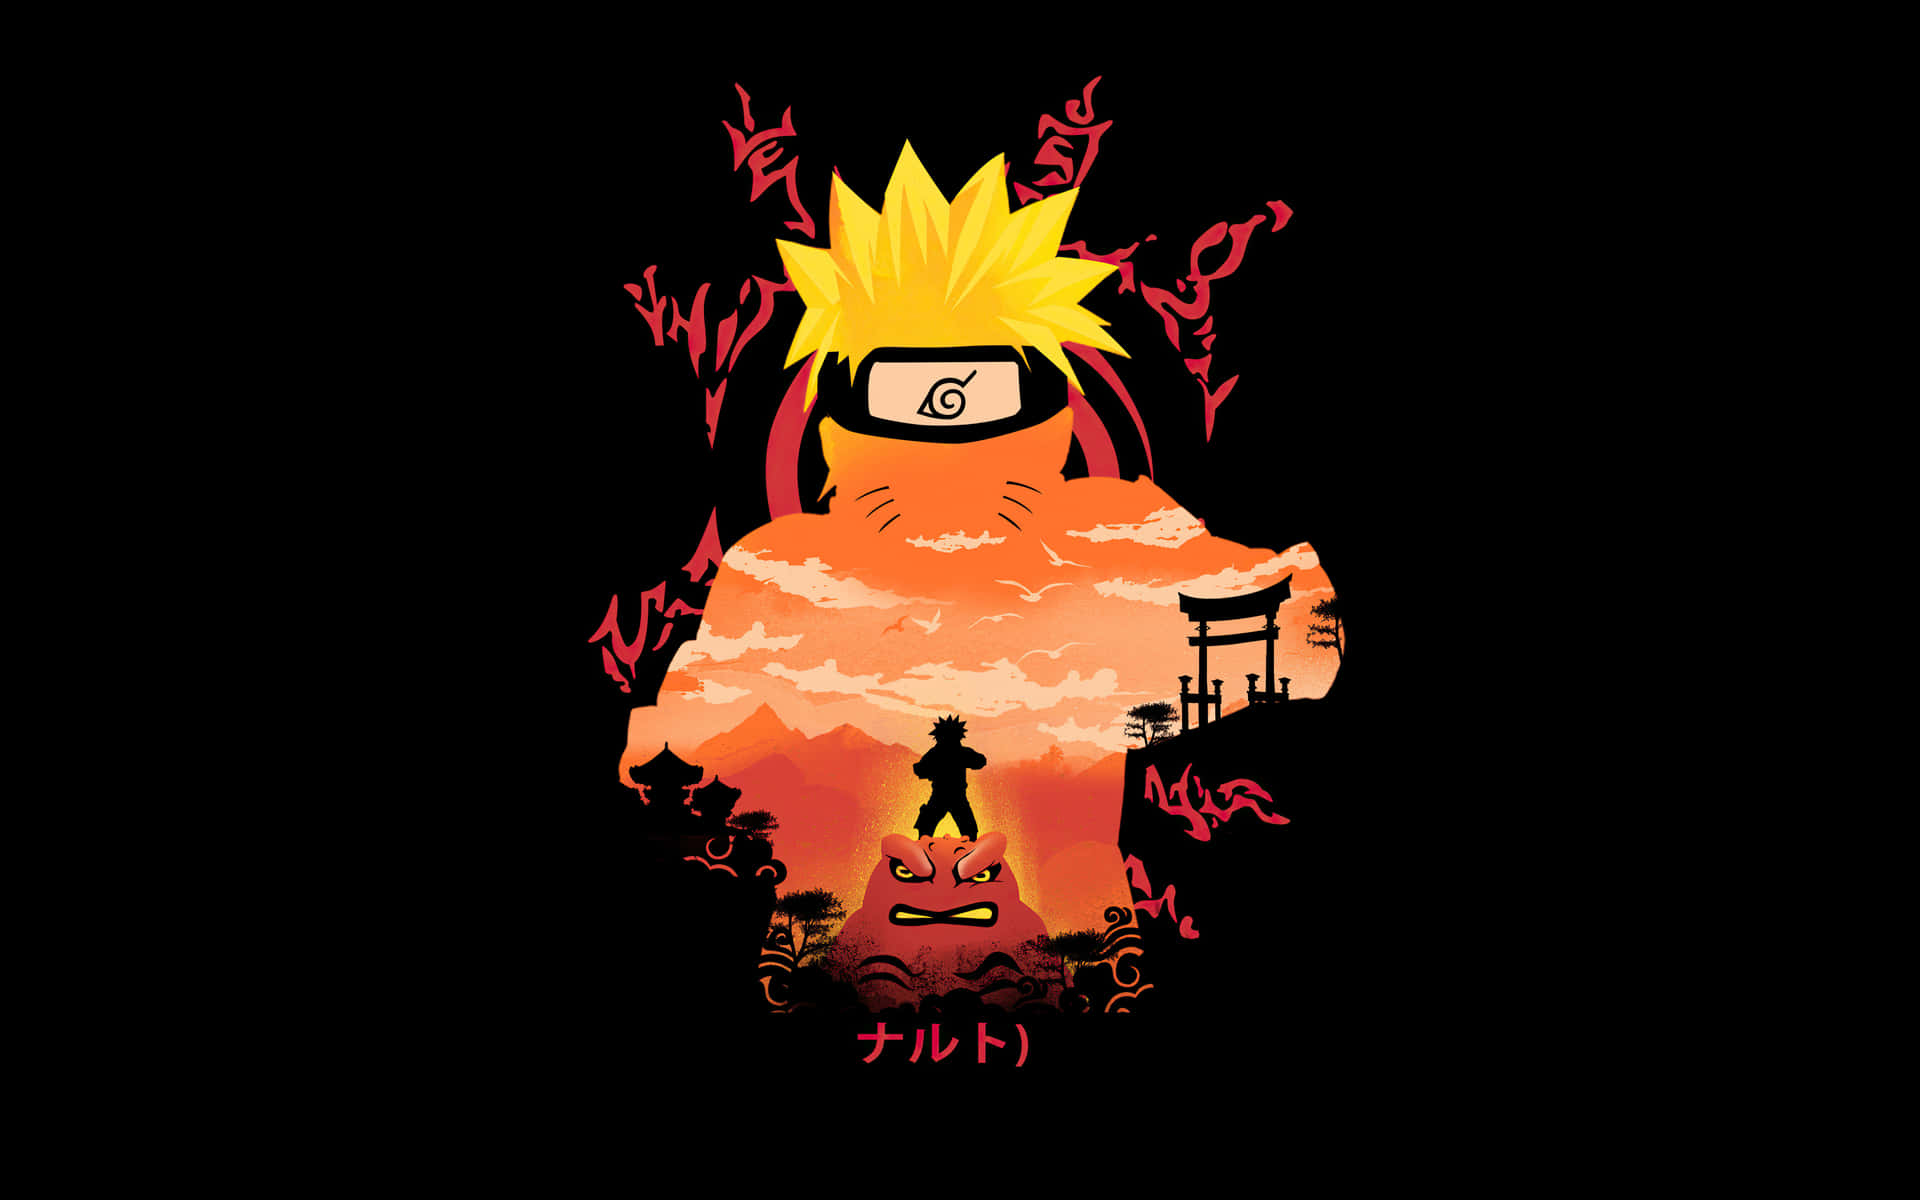 Pop culture favorite Naruto joins forces with Chibi art for a super fun iteration! Wallpaper